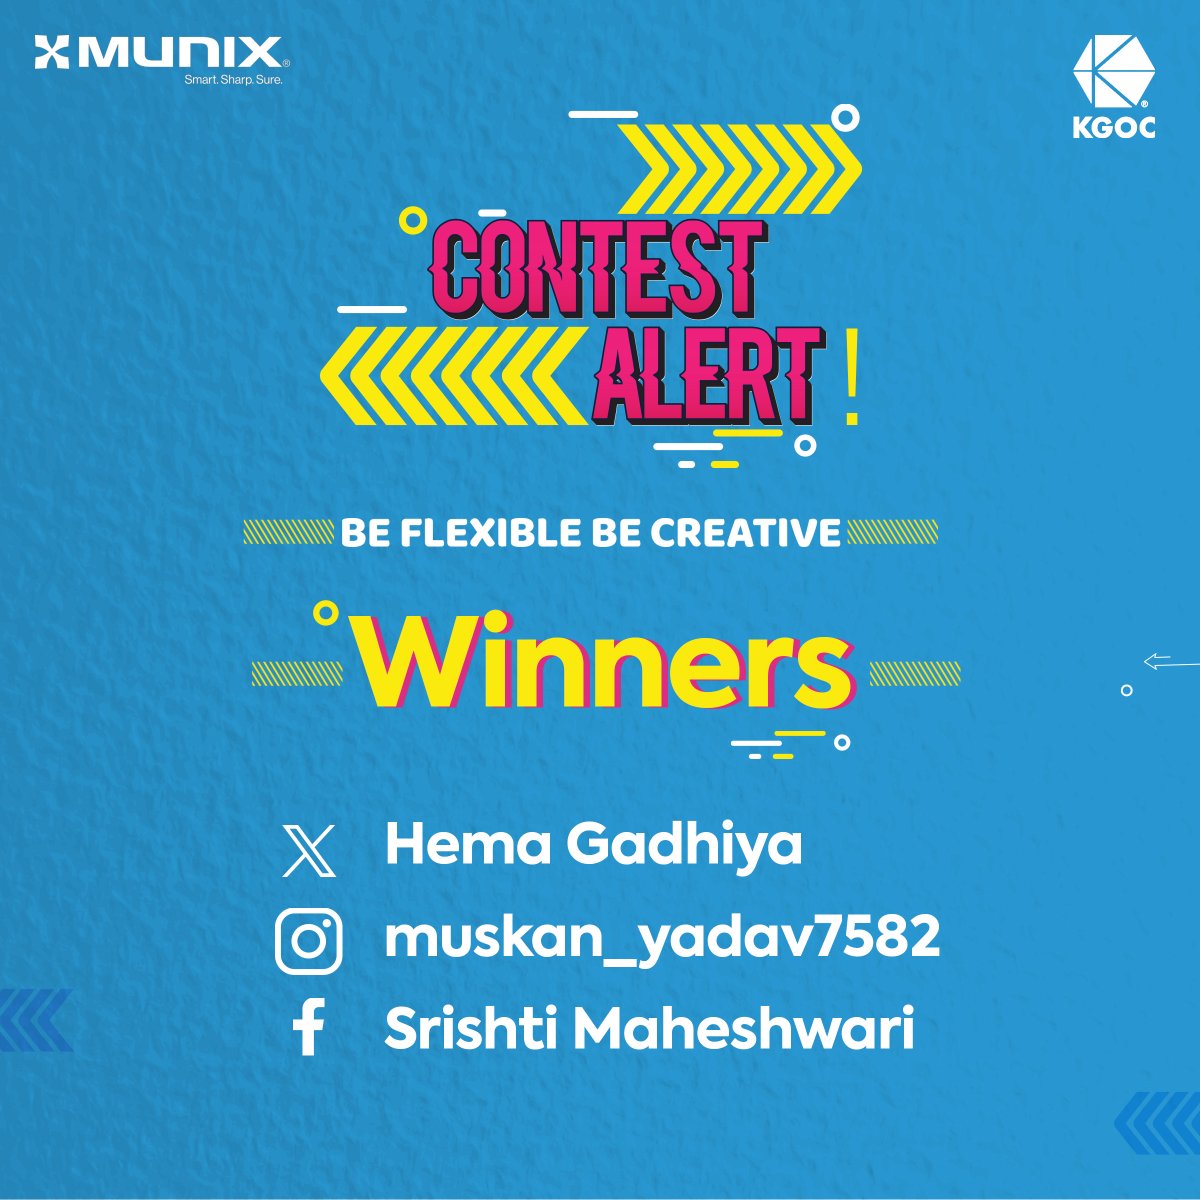 And the winners are in! 🌟 Big congratulations to our lucky giveaway winners! Get ready to enjoy your rewards! 🏆🎉 Next Step: DM us with your details to avail the gifts! #GiveawayChampions #WinnerAnnouncement #munix #kgoc